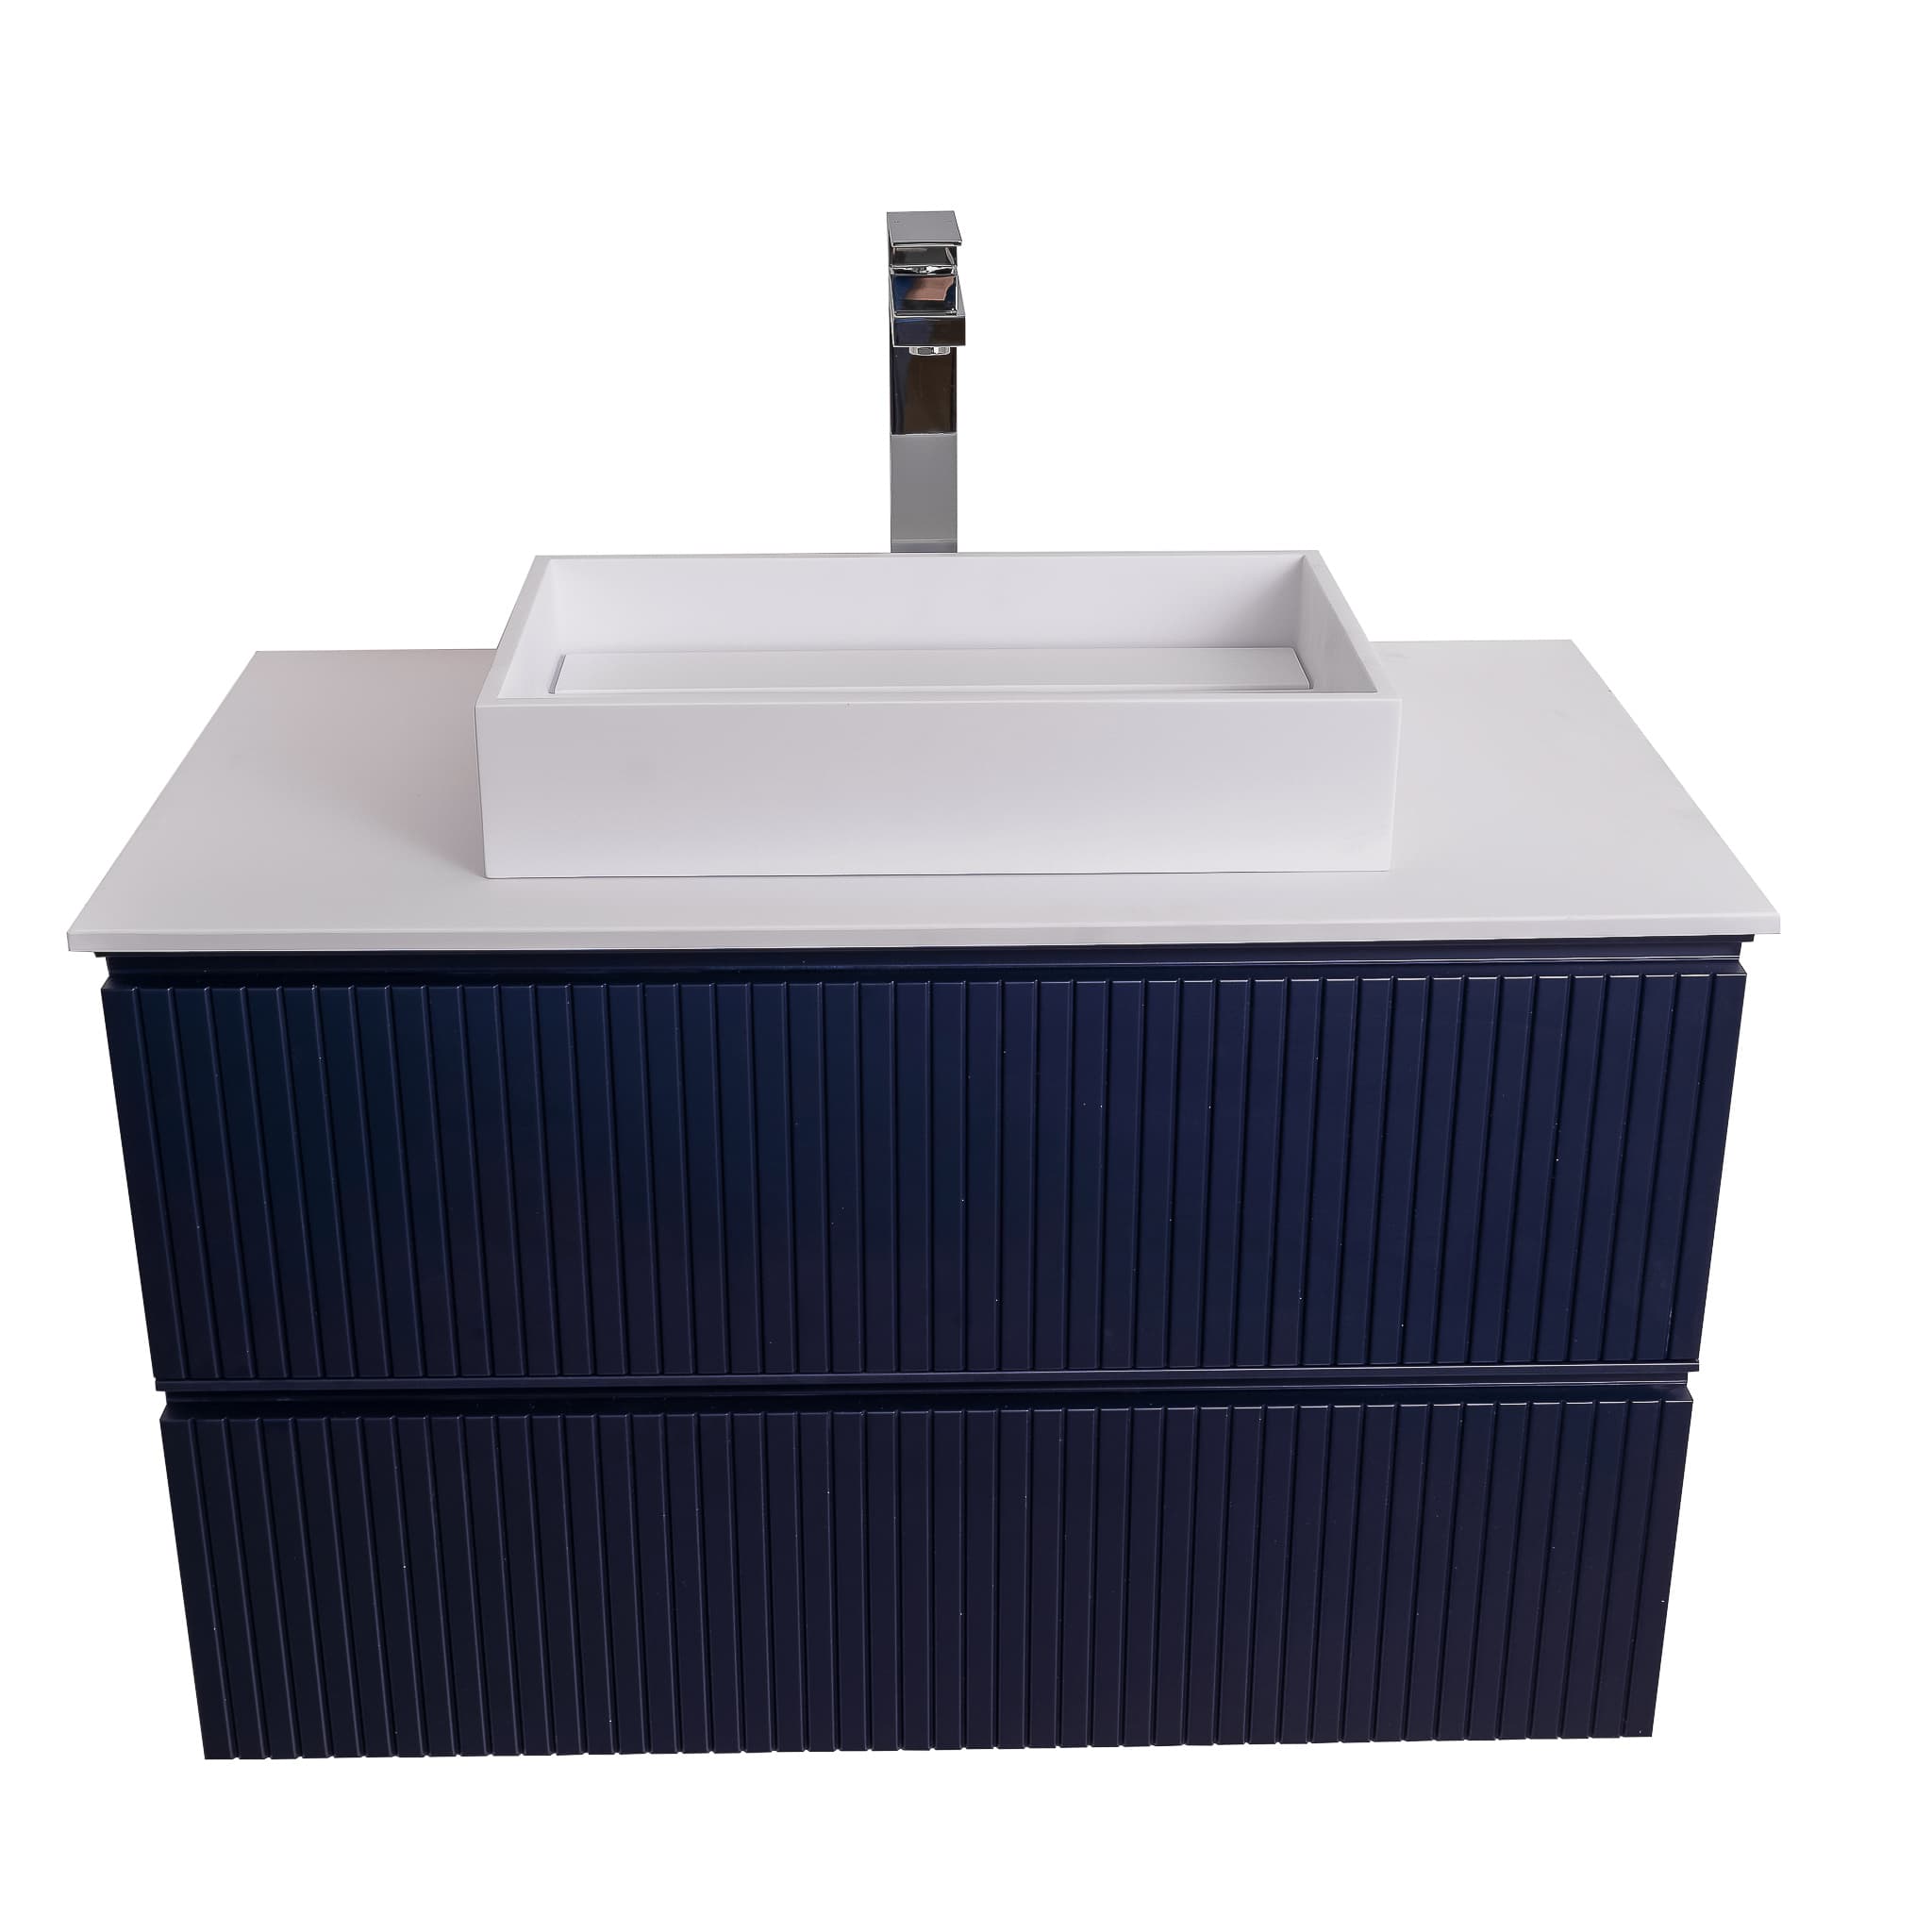 Ares 31.5 Matte Navy Blue Cabinet, Solid Surface Flat White Counter And Infinity Square Solid Surface White Basin 1329, Wall Mounted Modern Vanity Set